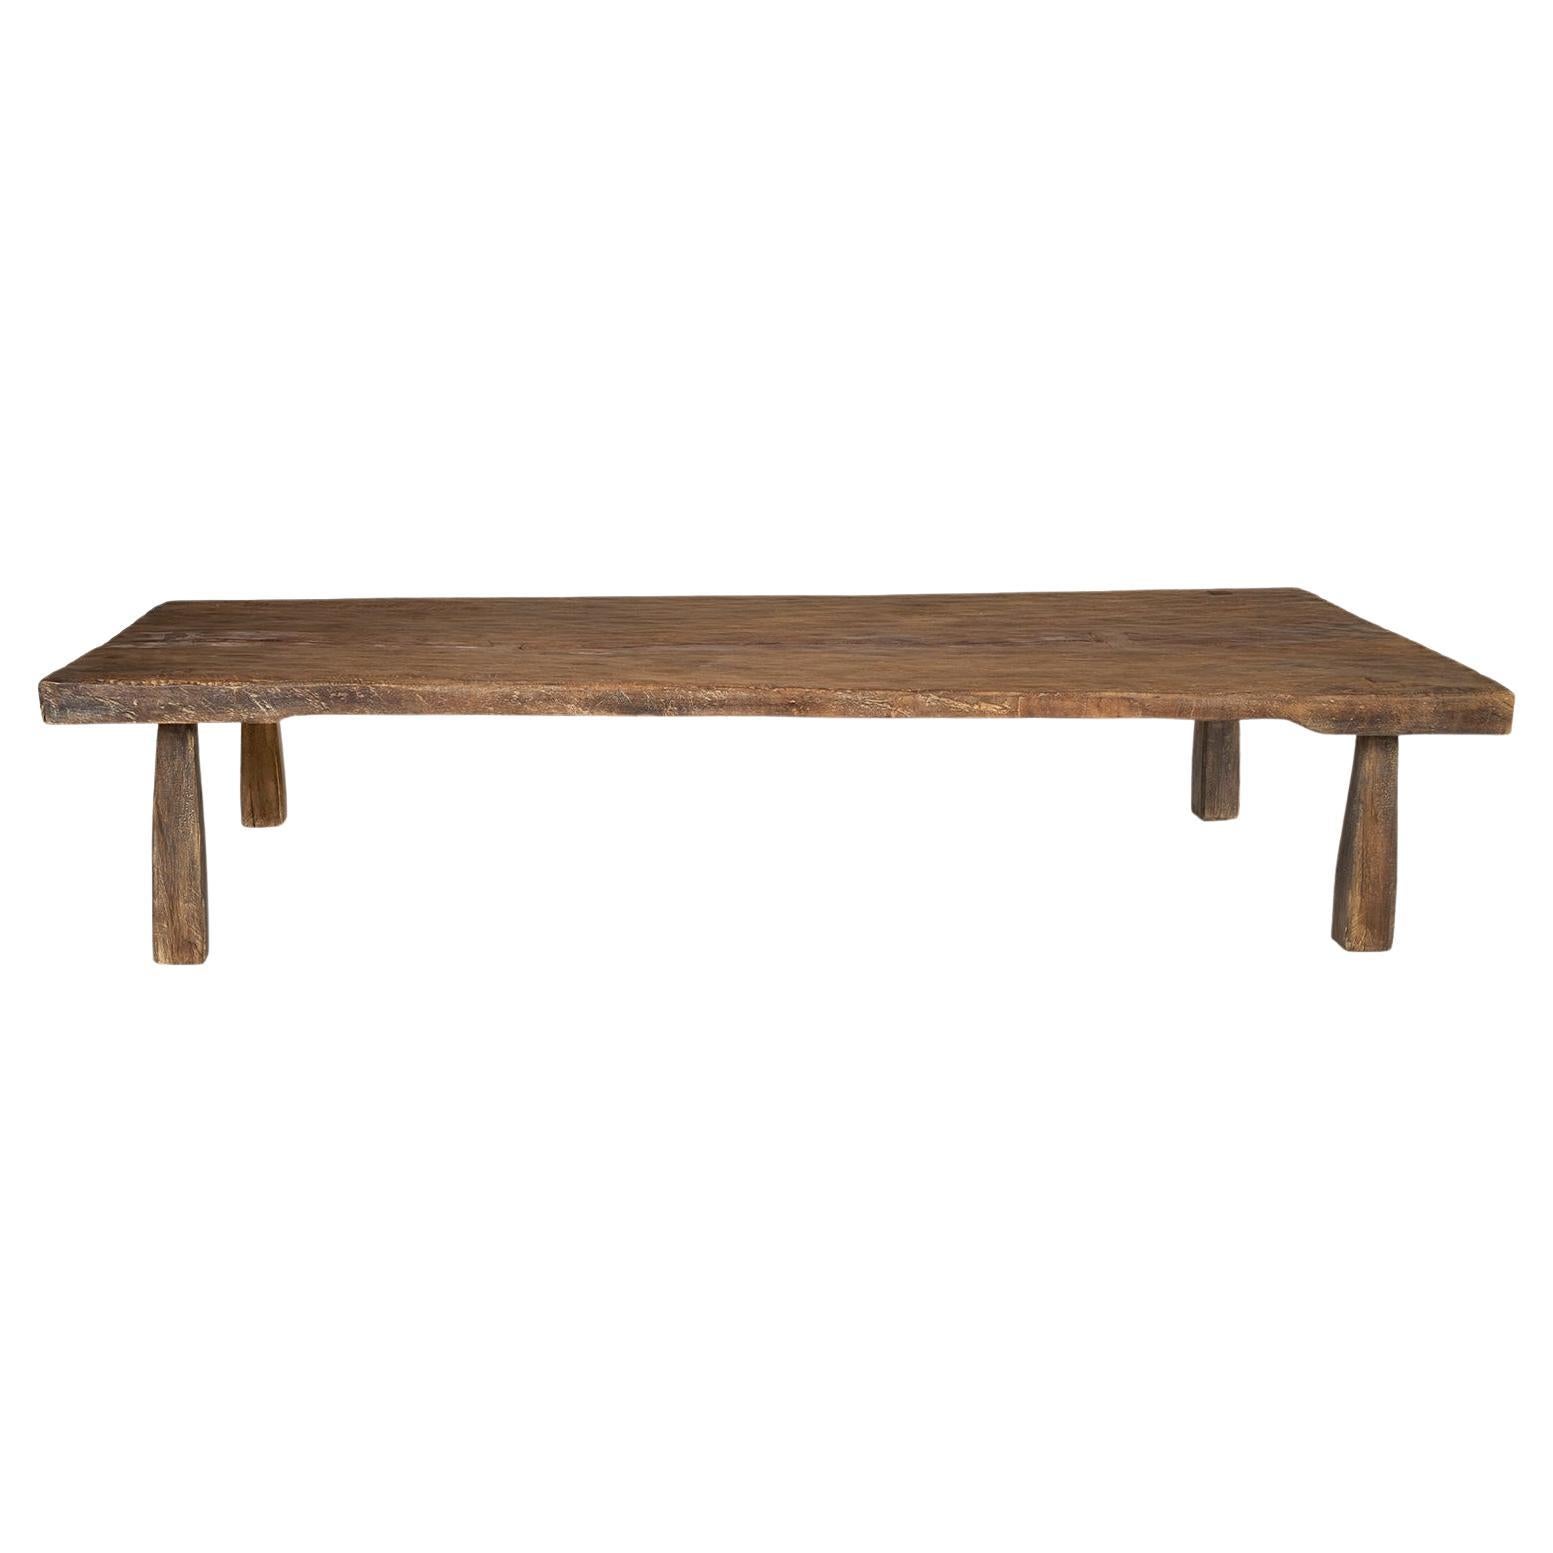 Weathered Teak Slab Coffee Table with Dovetail Accents